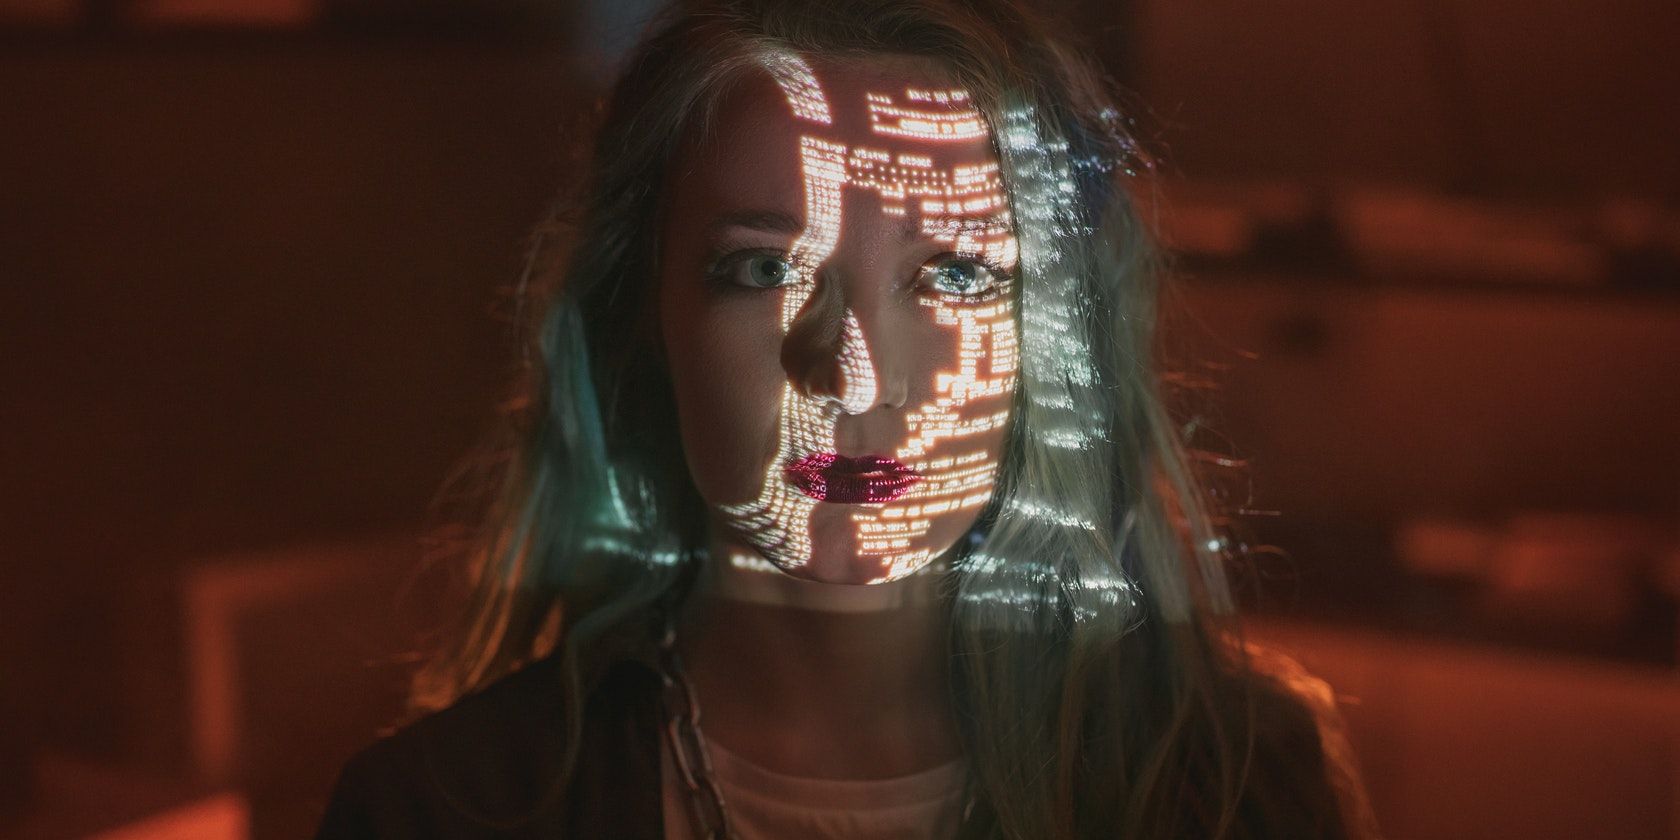 image of a blue-haired woman standing in the dark with numbers and codes projected onto her face